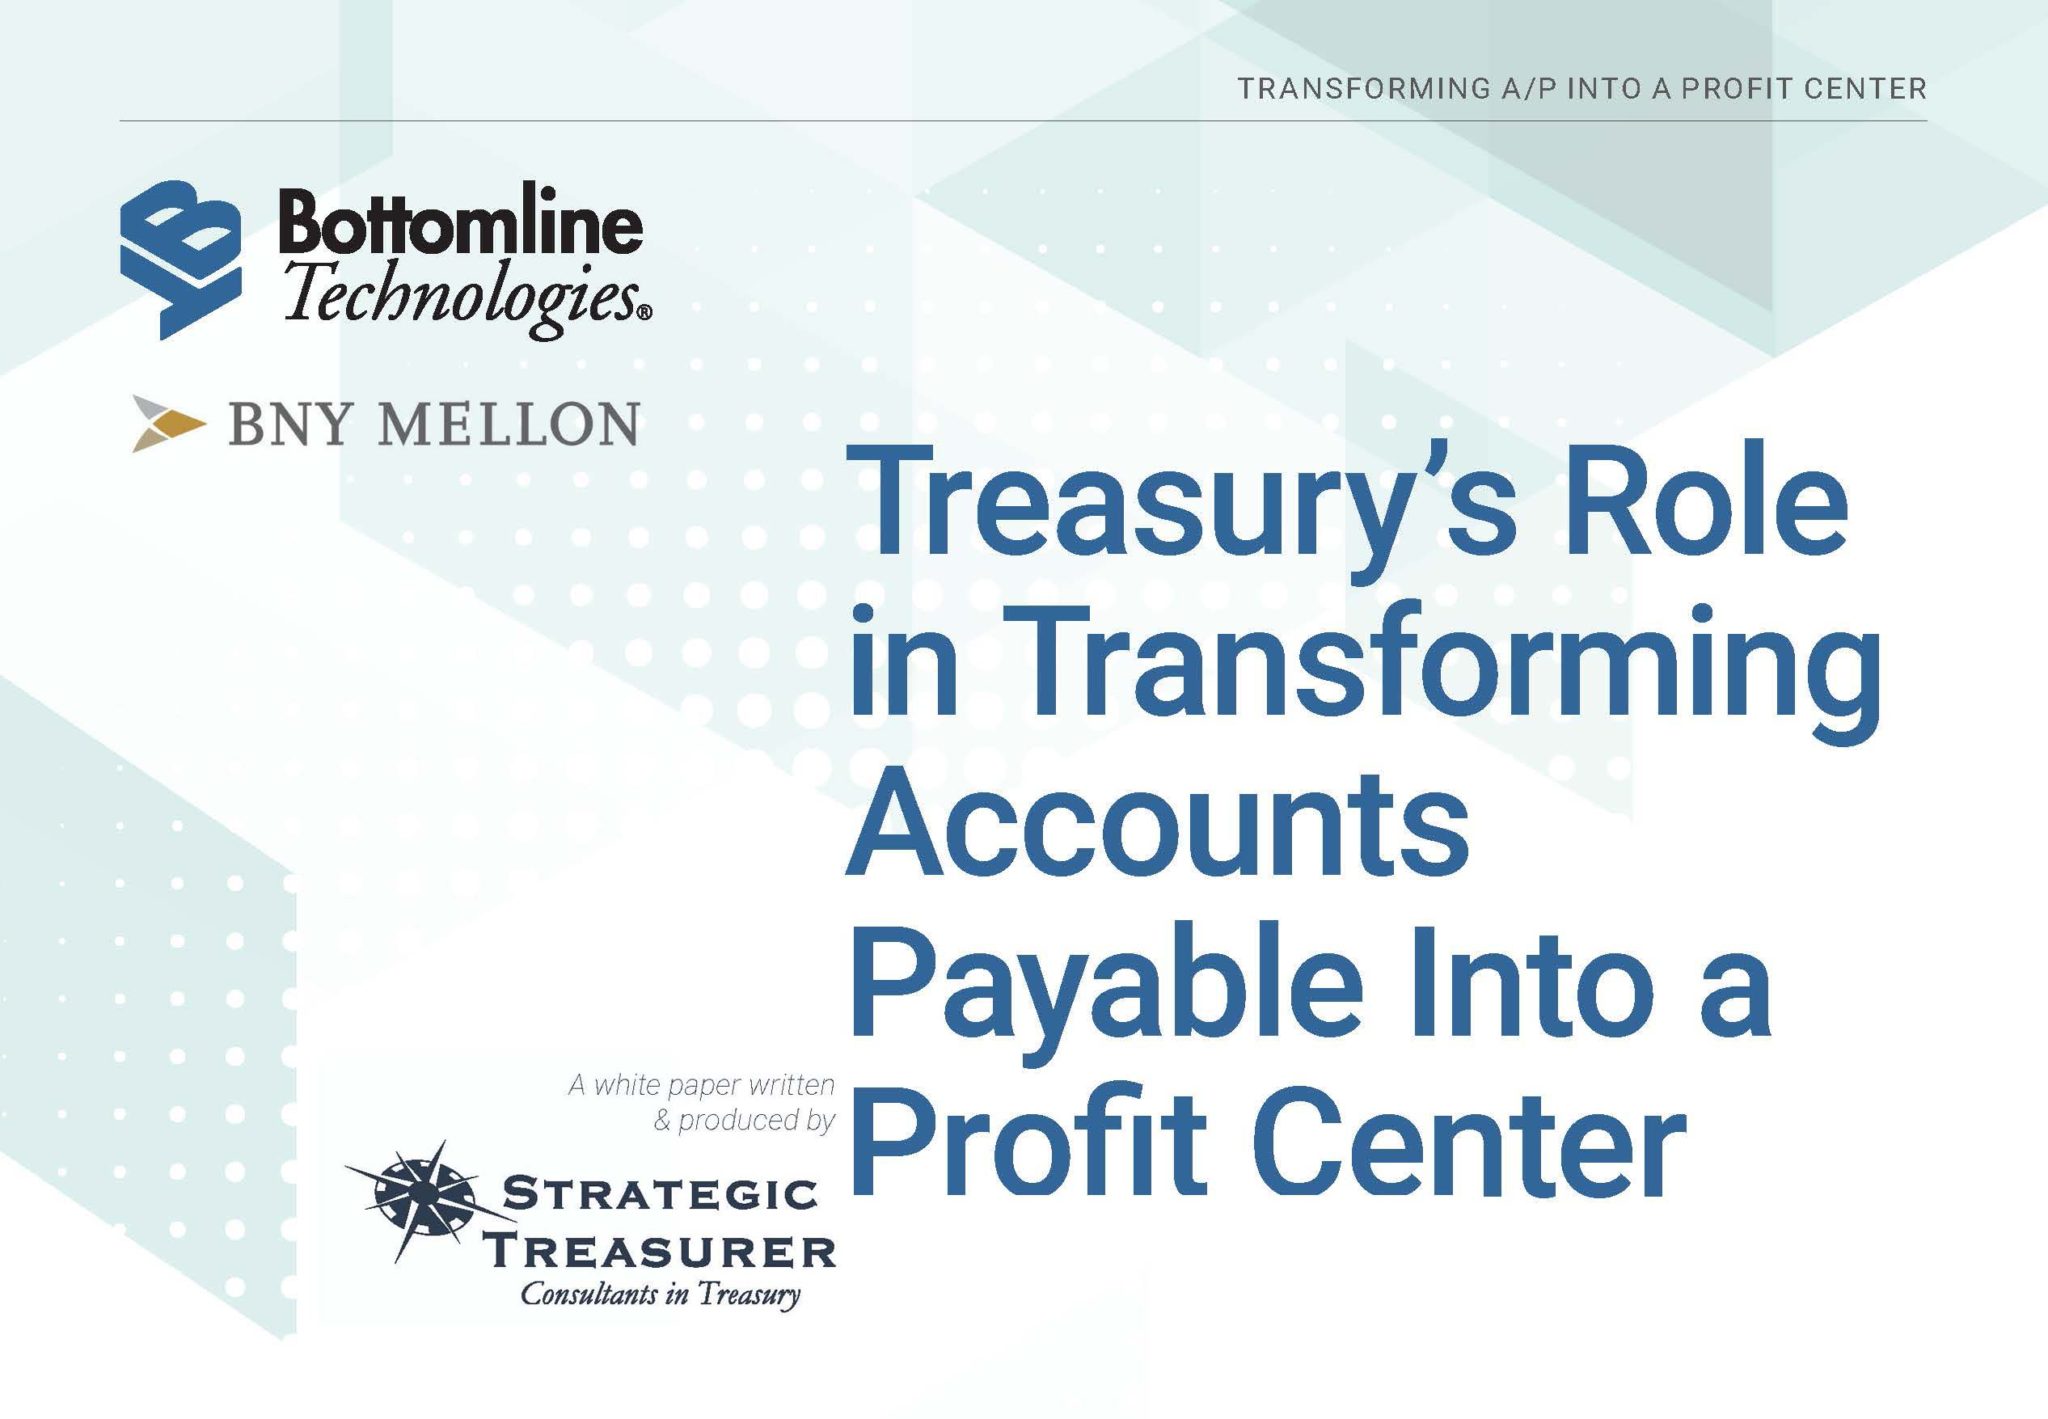 Treasury's Role in Transforming Accounts Payable Into a Profit Center